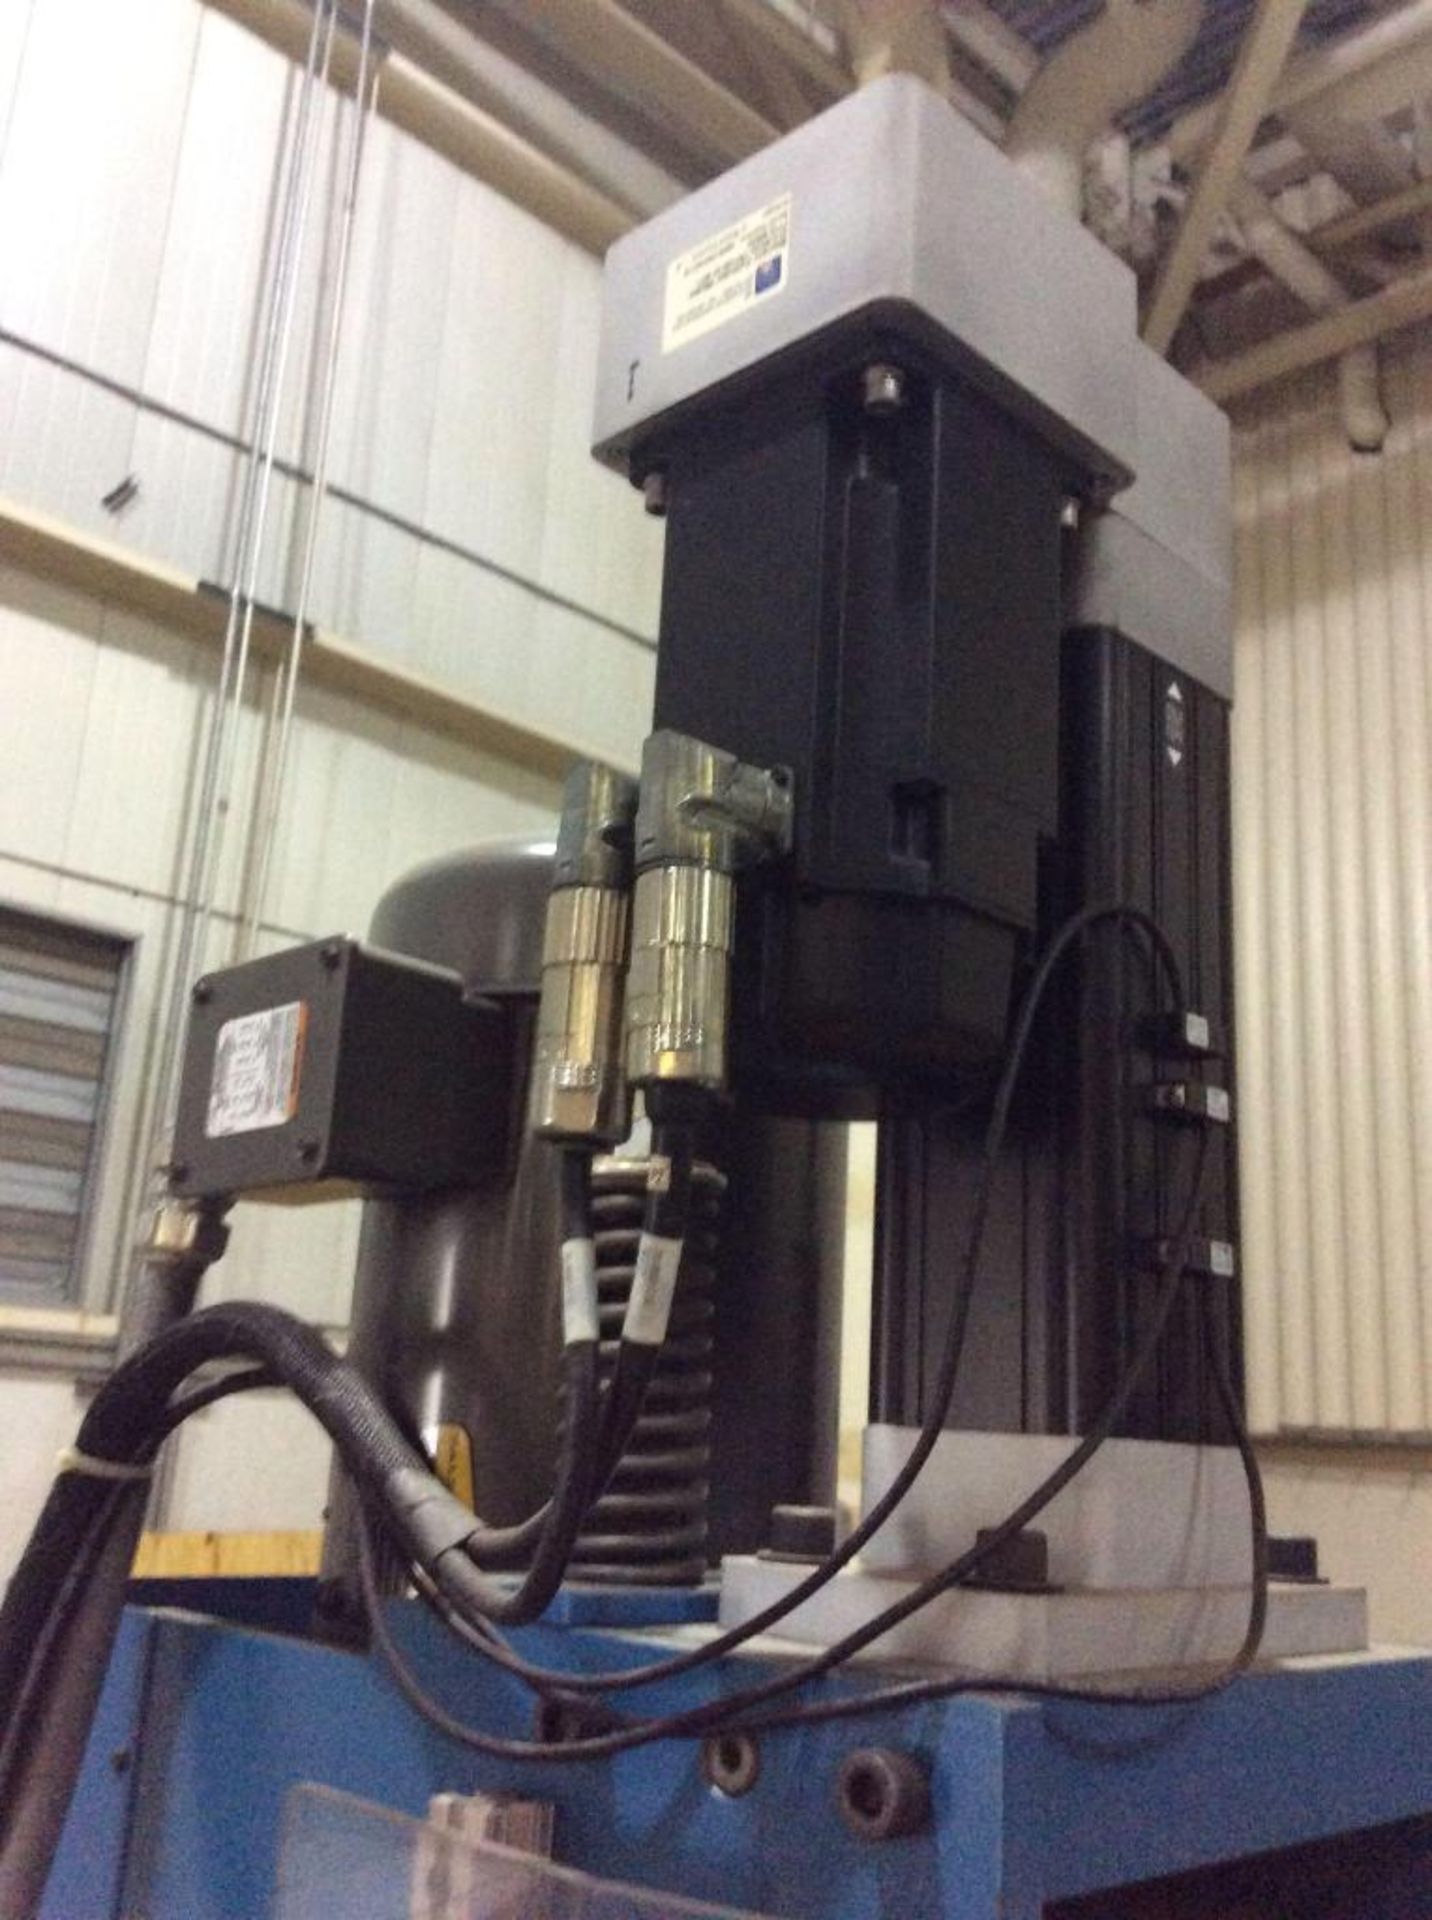 GTC accu-stir friction welder, mn 1028-001, sn 3 with DRO, 5 hp motor, 3 phase - Image 4 of 5